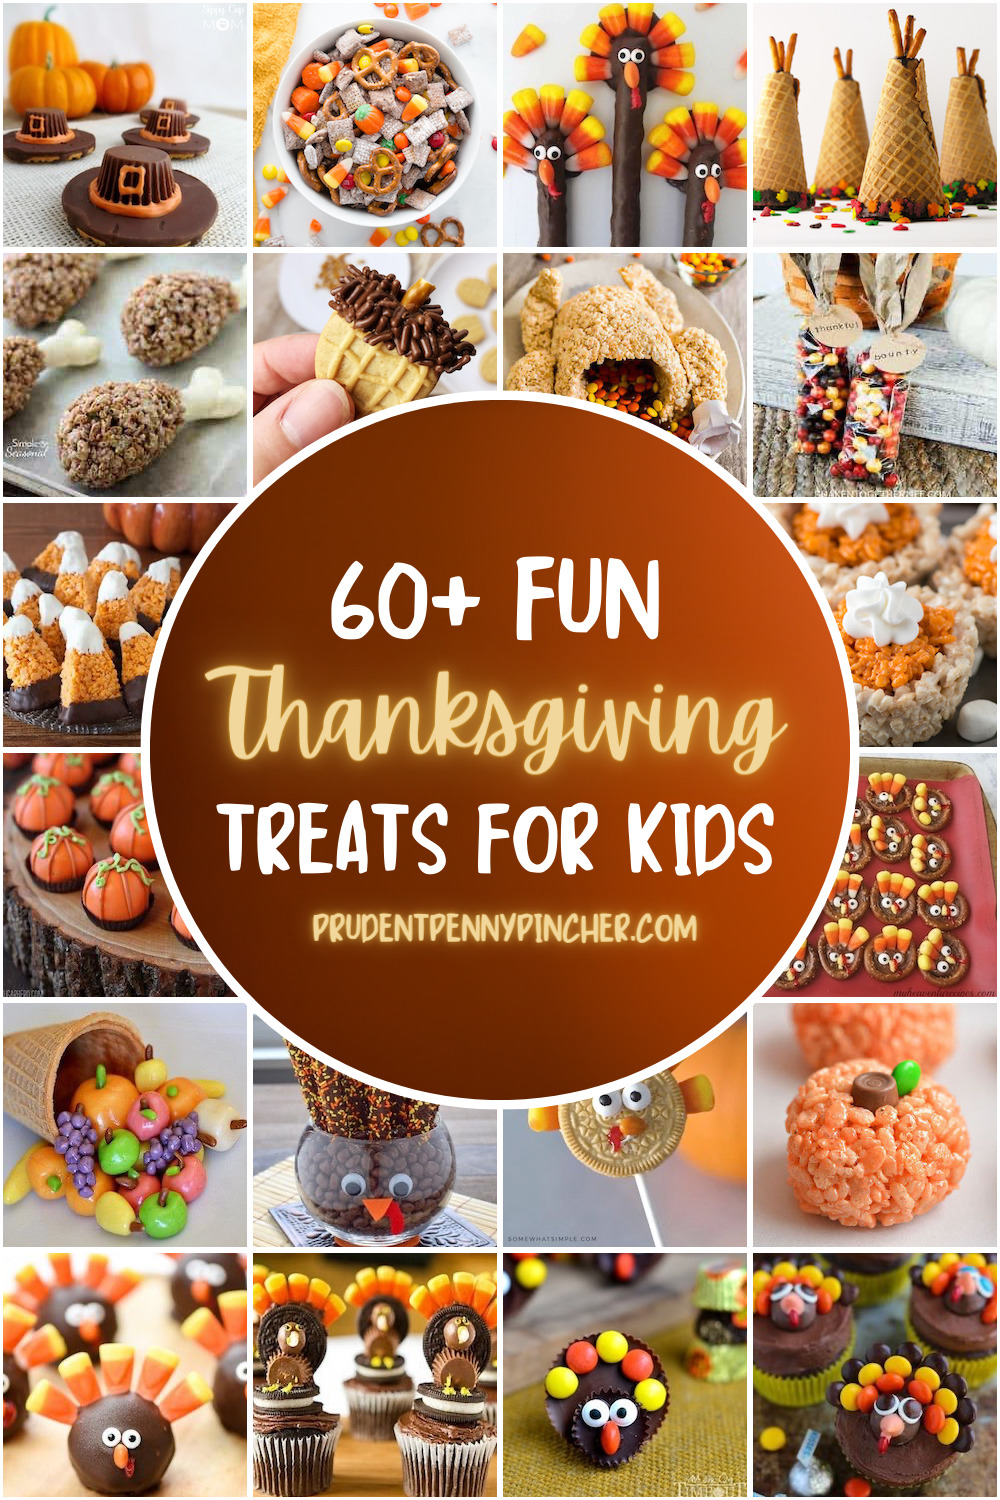 Thanksgiving Traditions: My Kind of Holiday - DIY on the Cheap